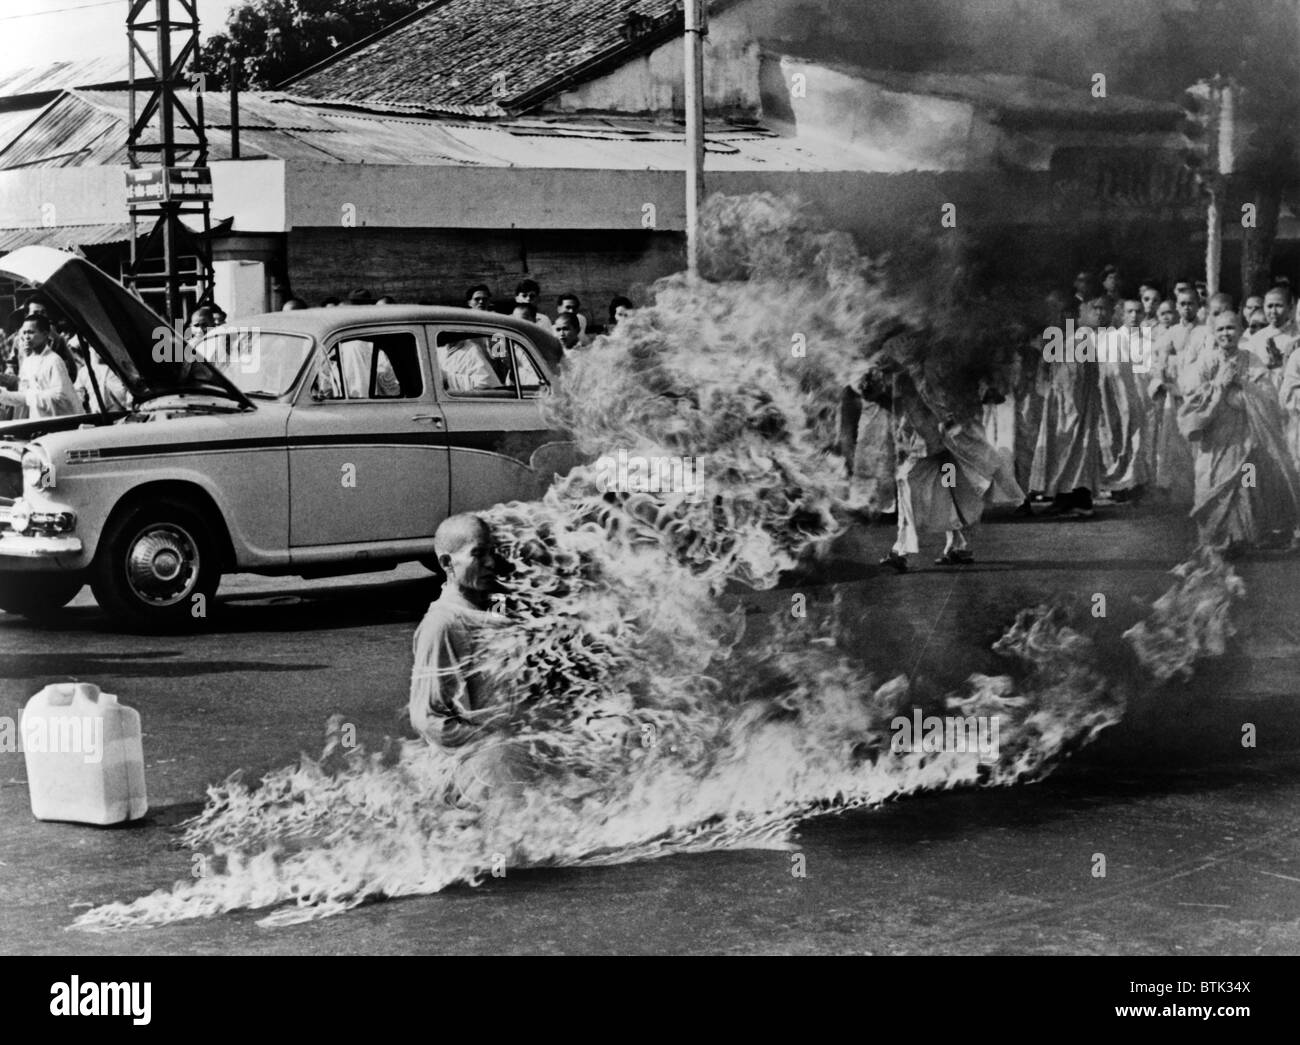 Buddhist monk Thich Quang Duc, protest Vietnamese government oppression of Buddhists, poured gasoline over his body and set himself on fire. He maintained his meditative posture as his body burned. Pulitzer Prize winning photo by Malcolm W. Browne. Saigon 1963. Stock Photo